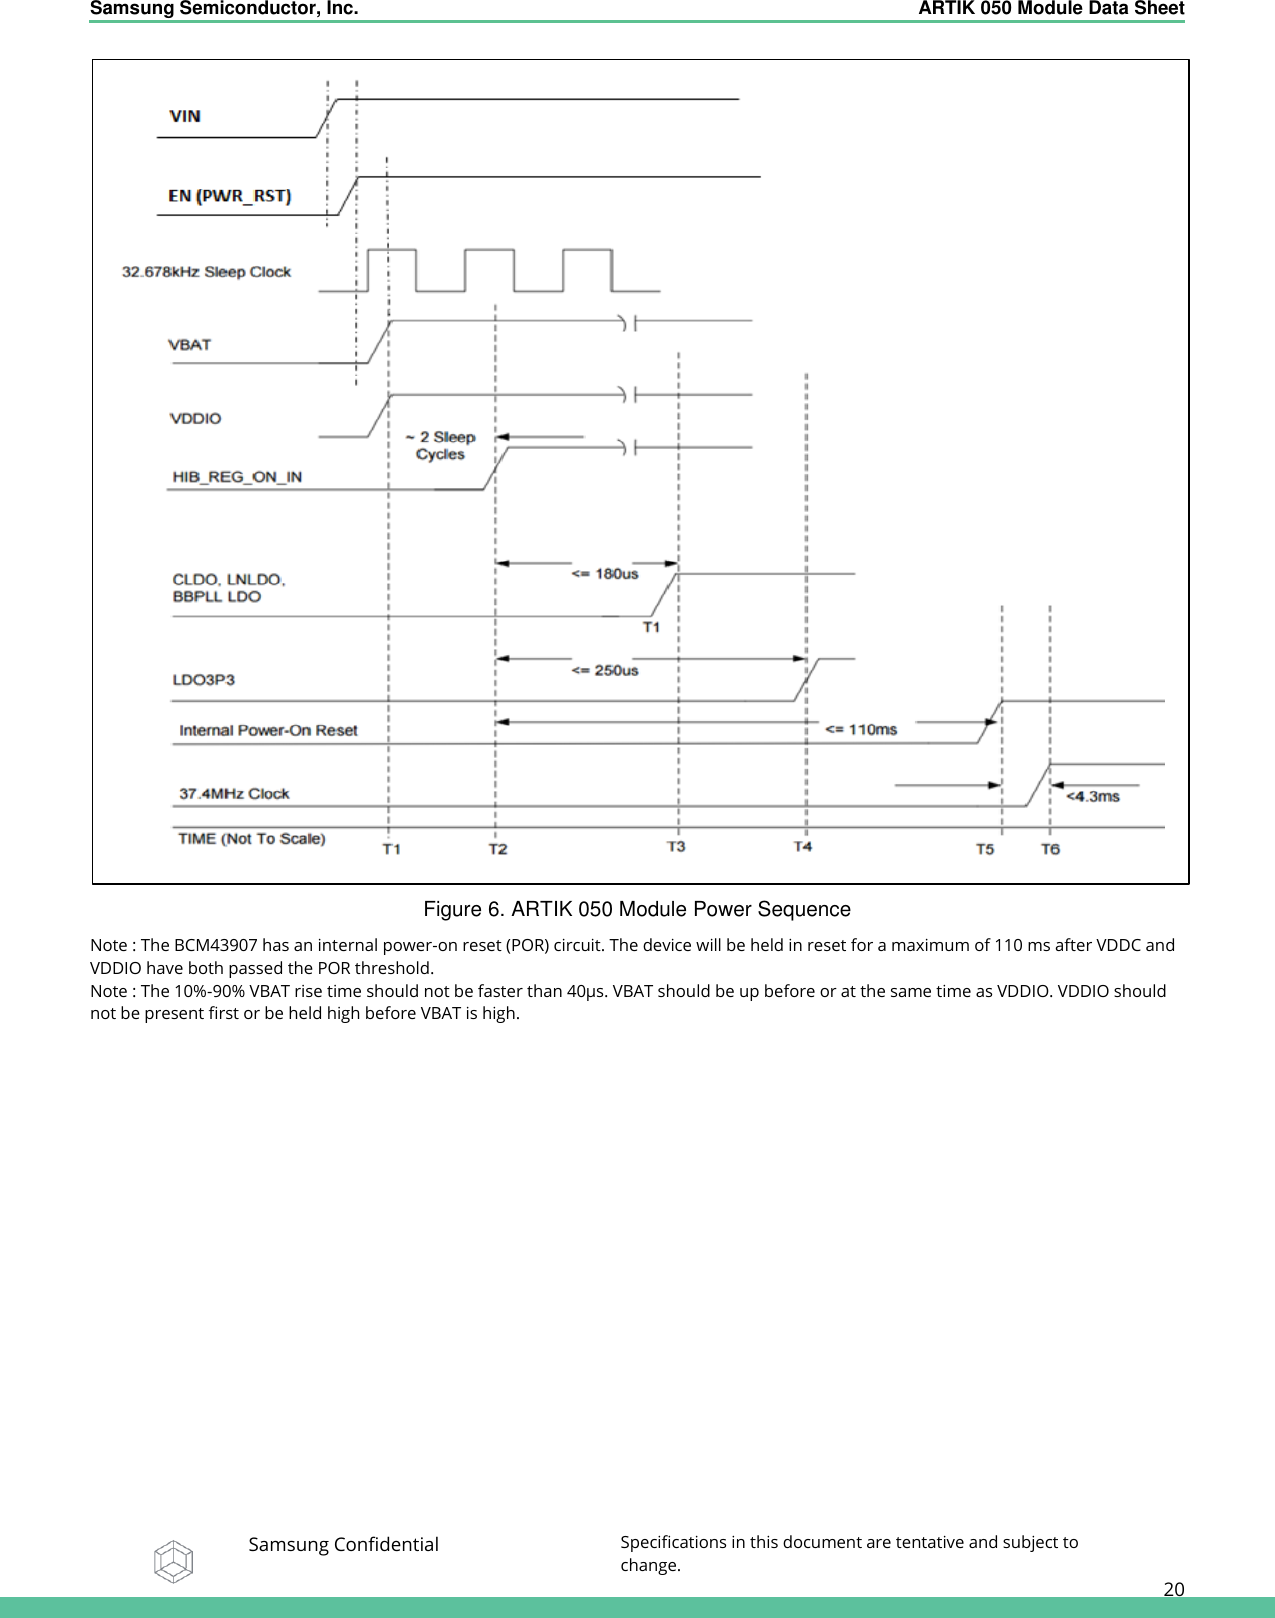 Samsung Semiconductor, Inc.  ARTIK 050 Module Data Sheet   Samsung Confidential Specifications in this document are tentative and subject to change.  20  Figure 6. ARTIK 050 Module Power Sequence Note : The BCM43907 has an internal power-on reset (POR) circuit. The device will be held in reset for a maximum of 110 ms after VDDC and VDDIO have both passed the POR threshold. Note : The 10%-90% VBAT rise time should not be faster than 40µ s. VBAT should be up before or at the same time as VDDIO. VDDIO should not be present first or be held high before VBAT is high.  